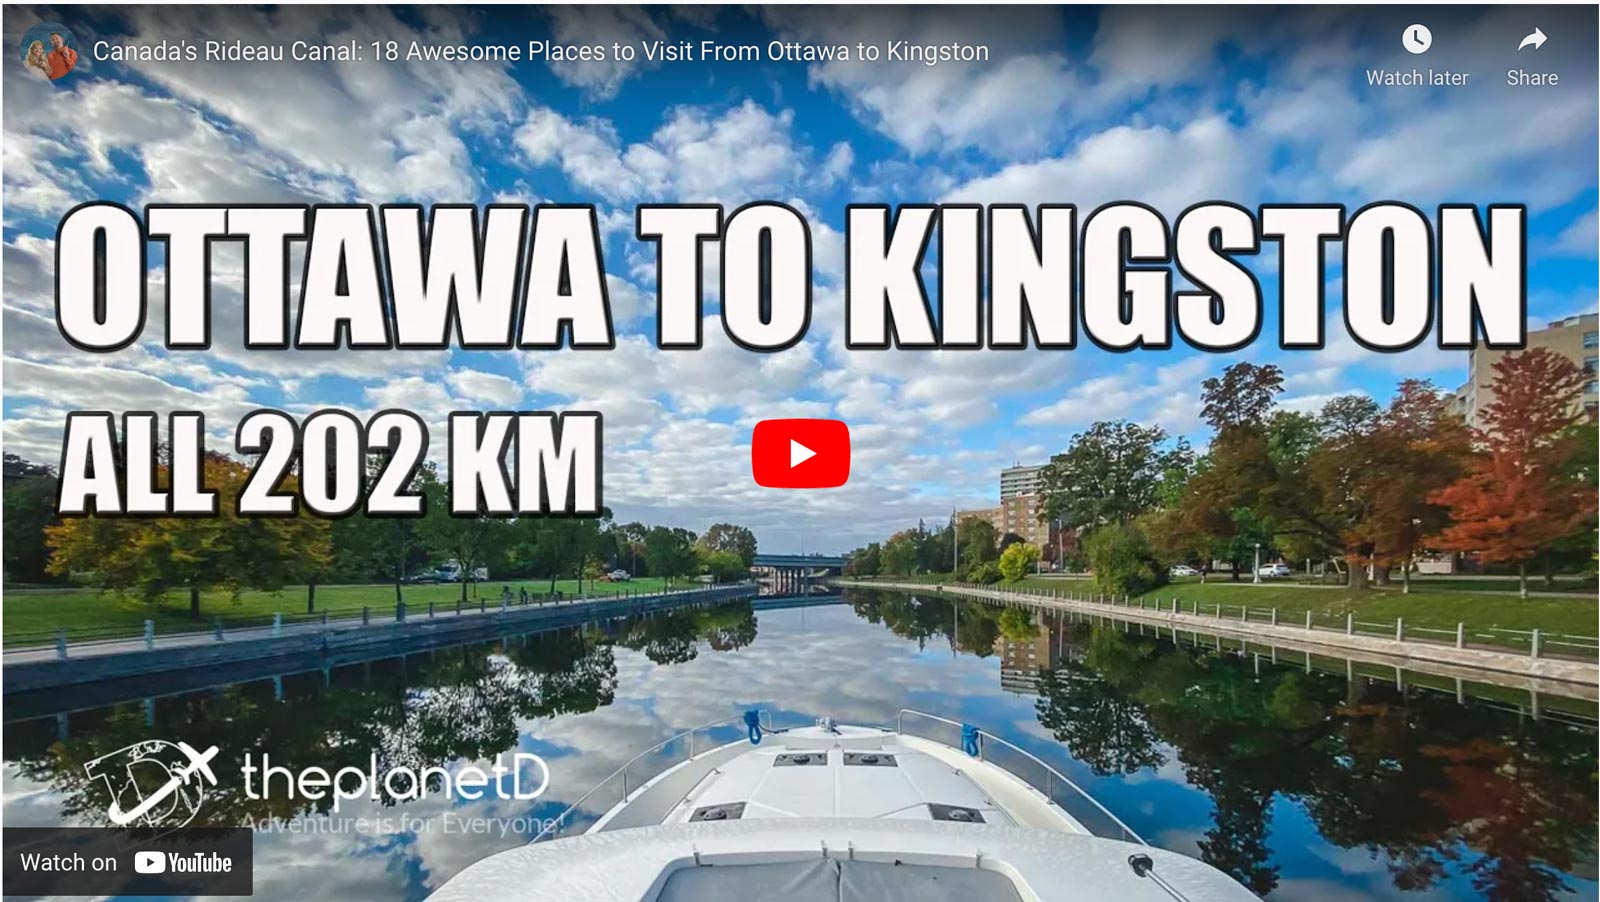 places to visit on the rideau canal